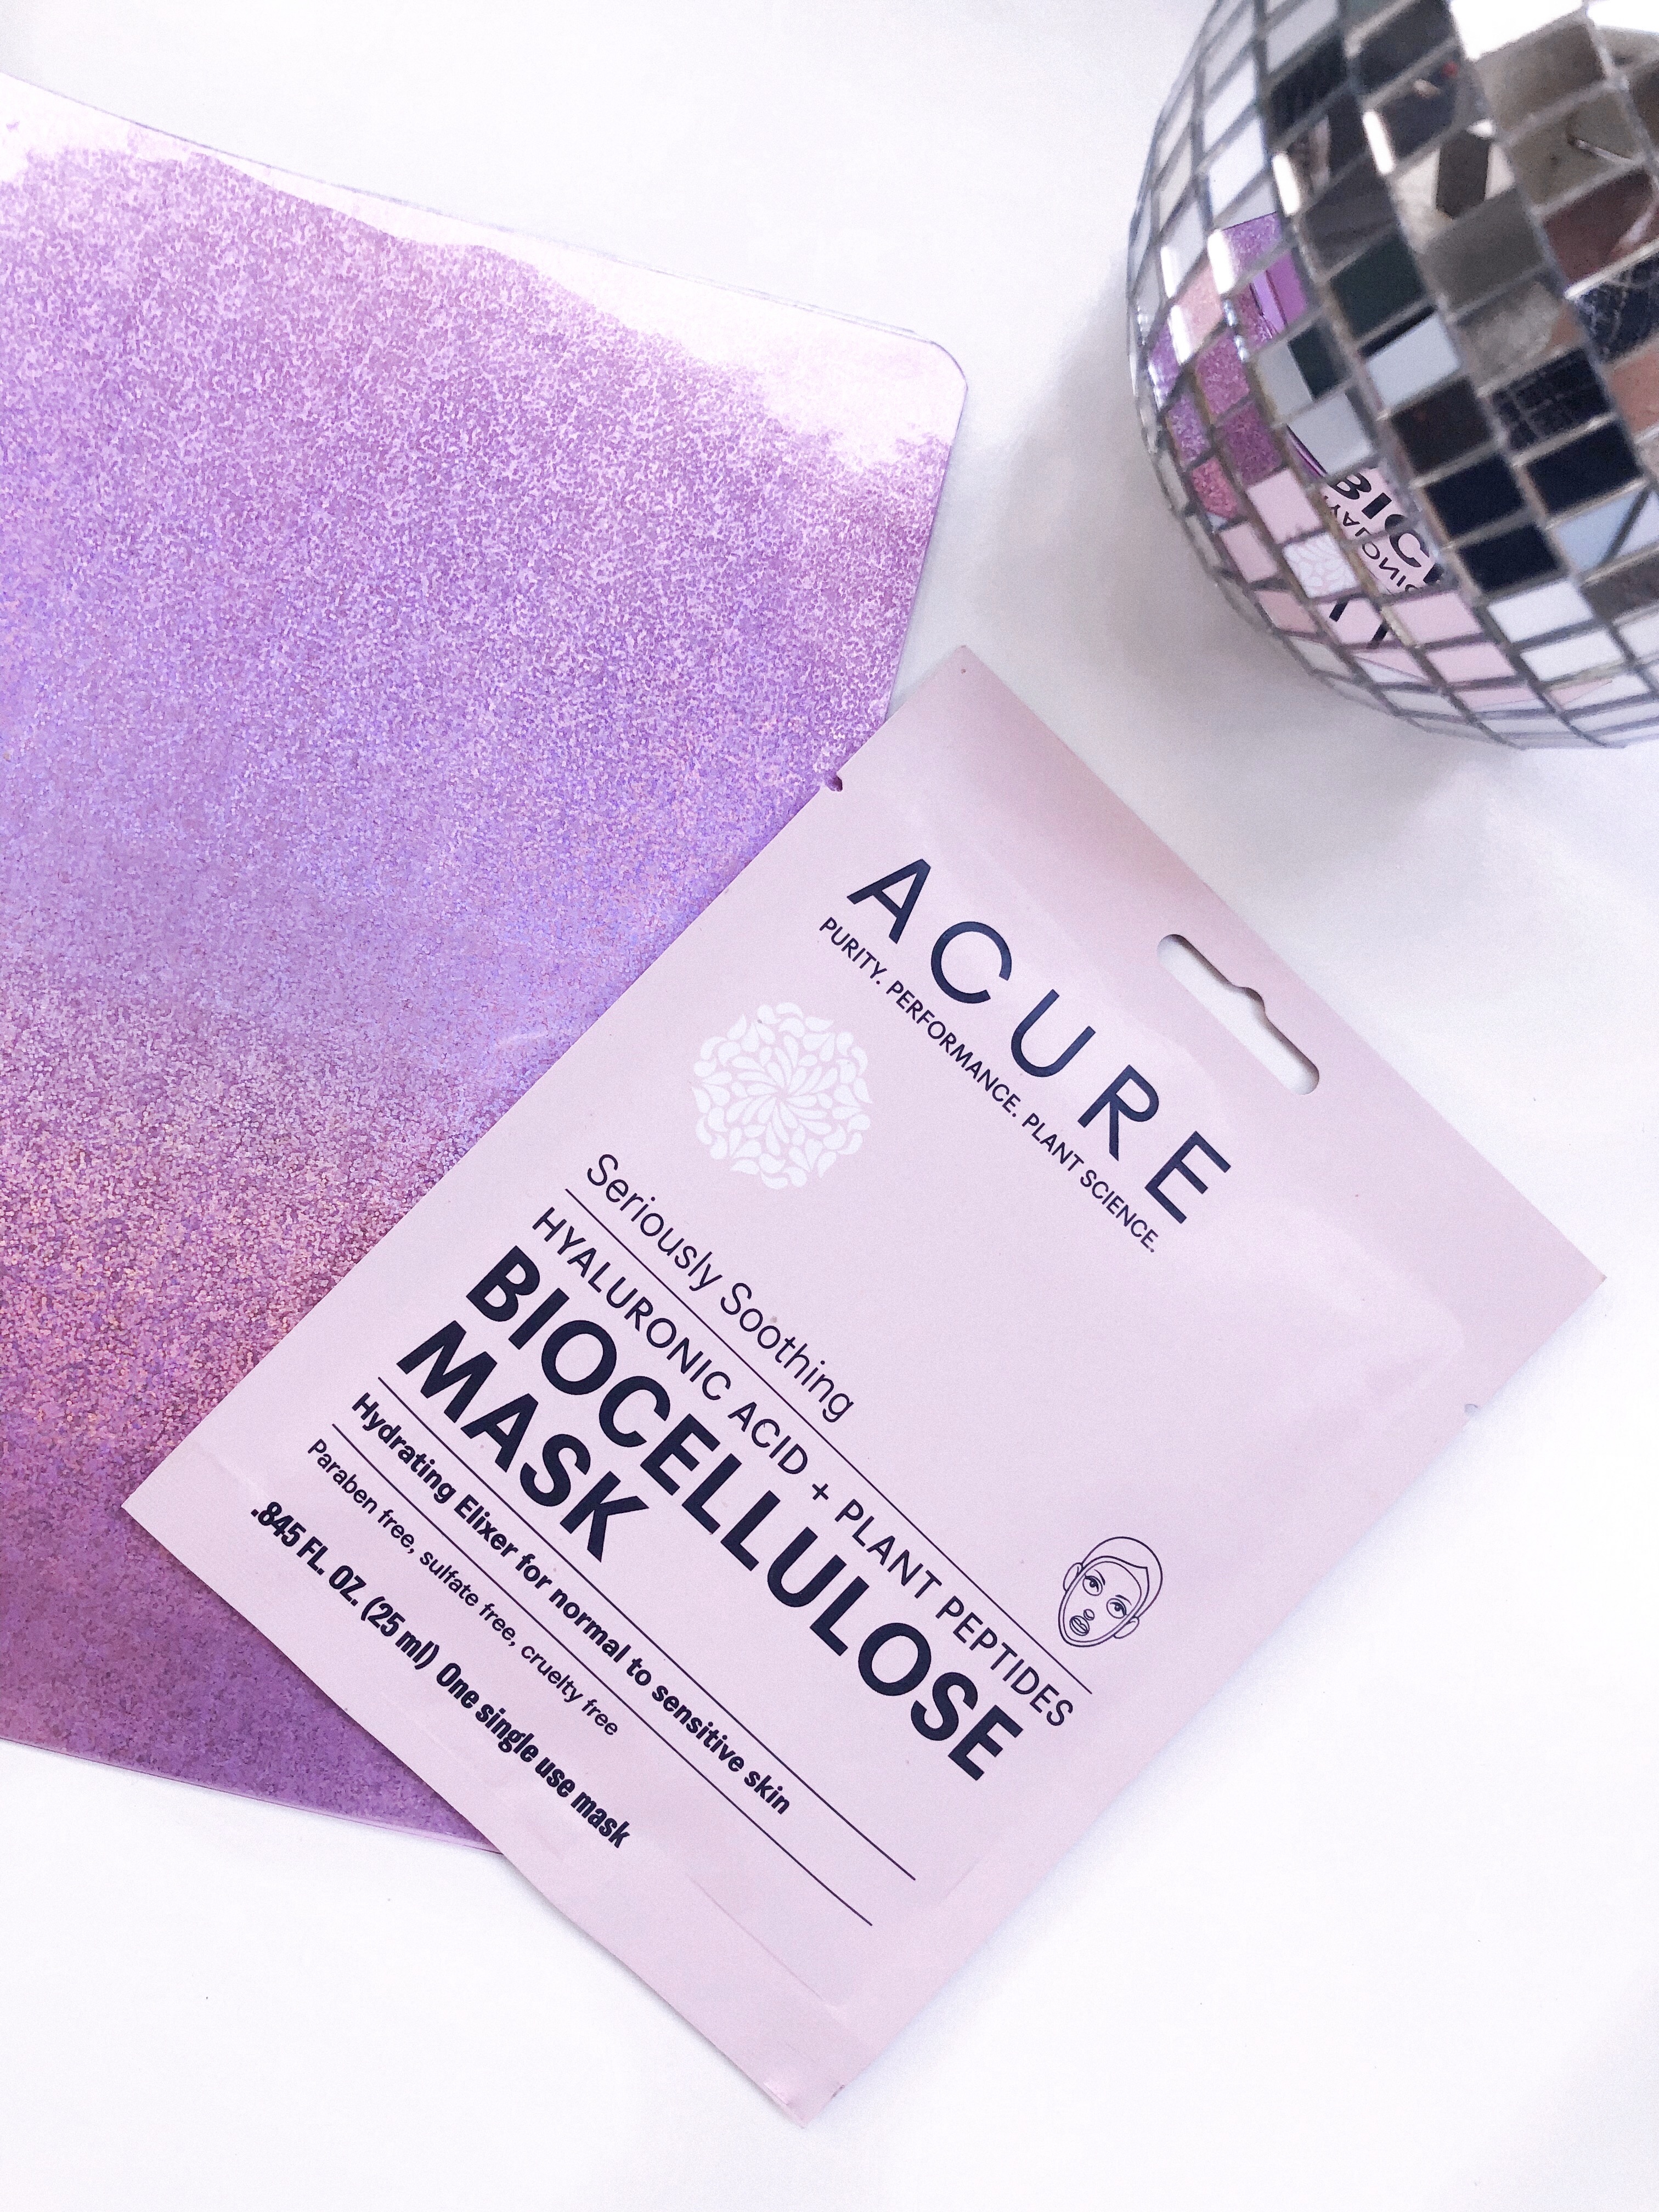 The Best Sheet Mask: Acure Biocellulose Mask